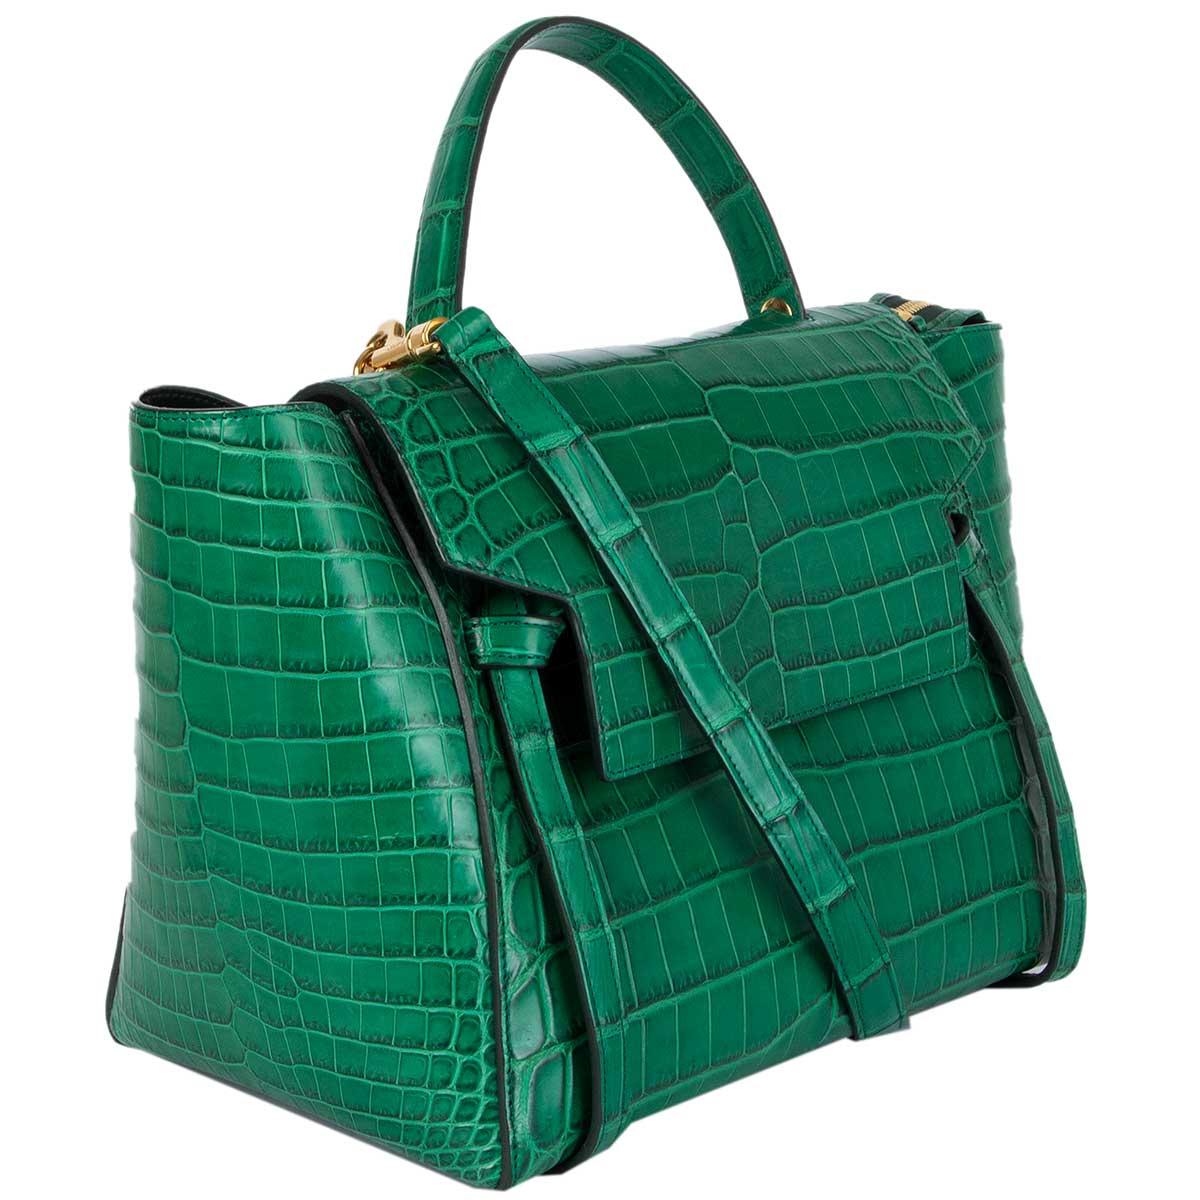 100% authentic Céline 'Mini Belt Bag' in green crocodile. Opens with a hidden slide hook closure and is lined in bottle green lambskin. Has two open pockets against the back. Comes with a detachable shoulder strap. Has been carried and is in